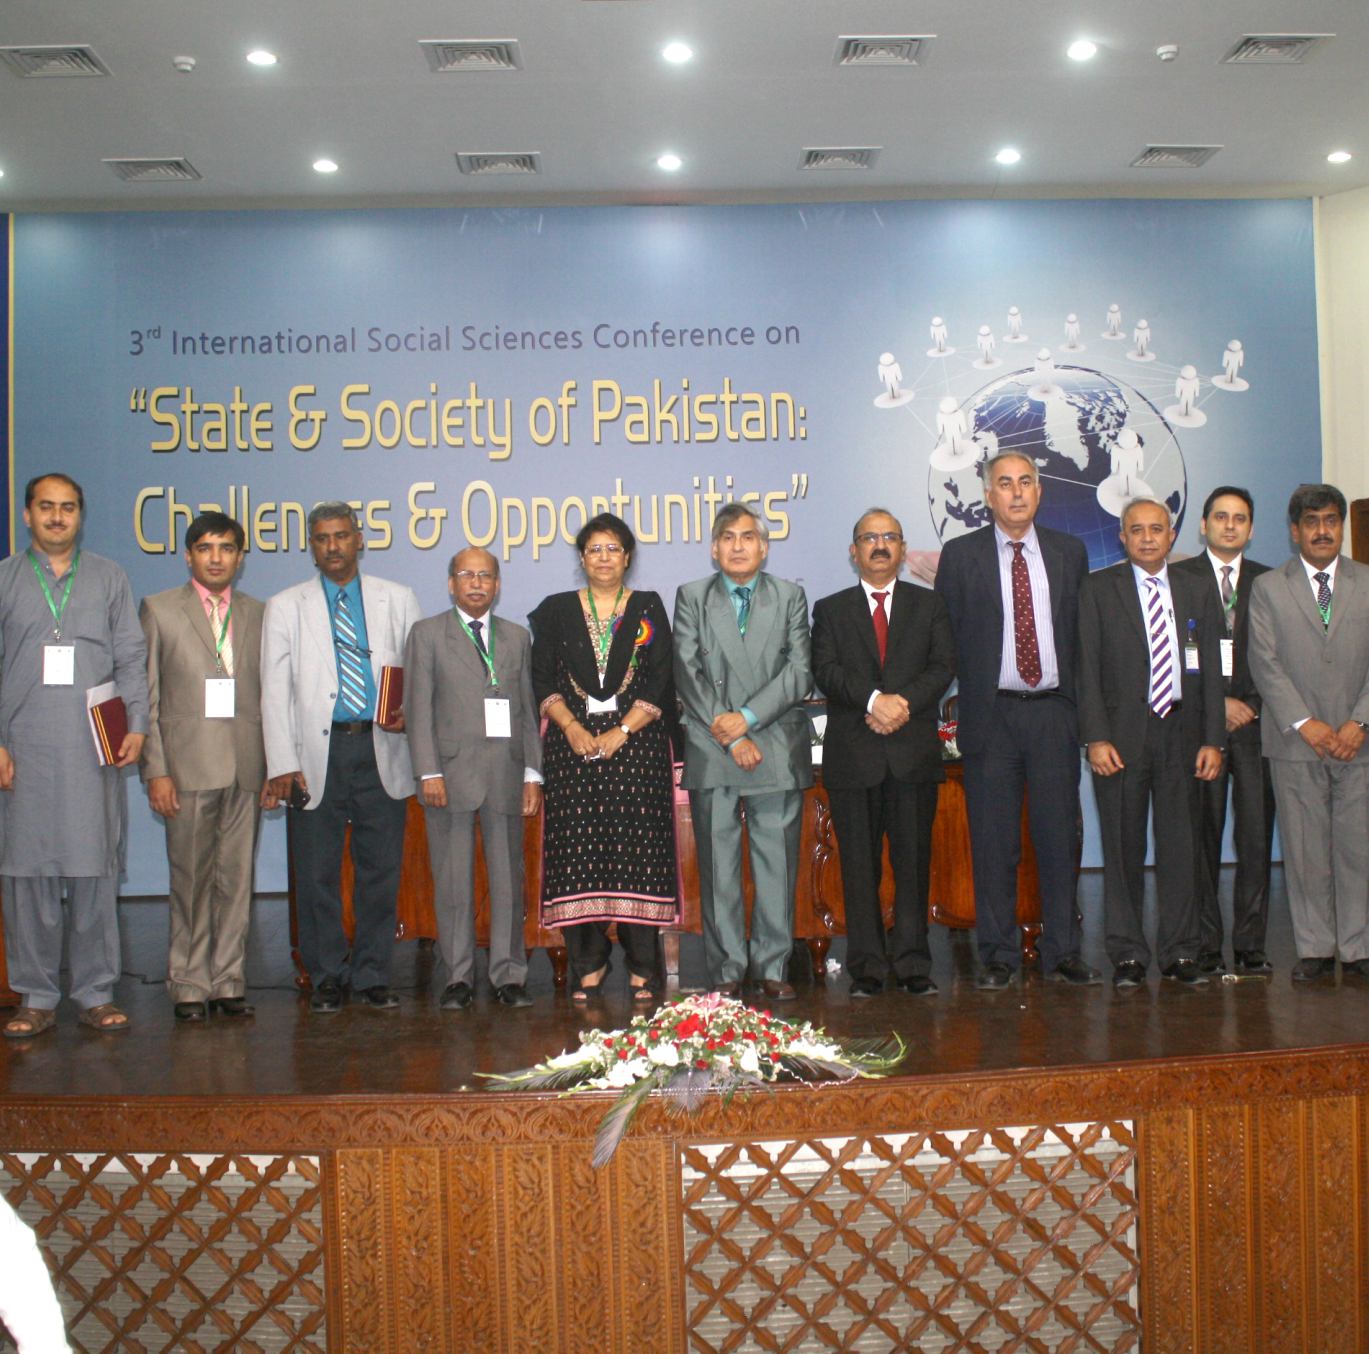 Group photo of participants of conference on social sciences held at the HEC, Islamabad